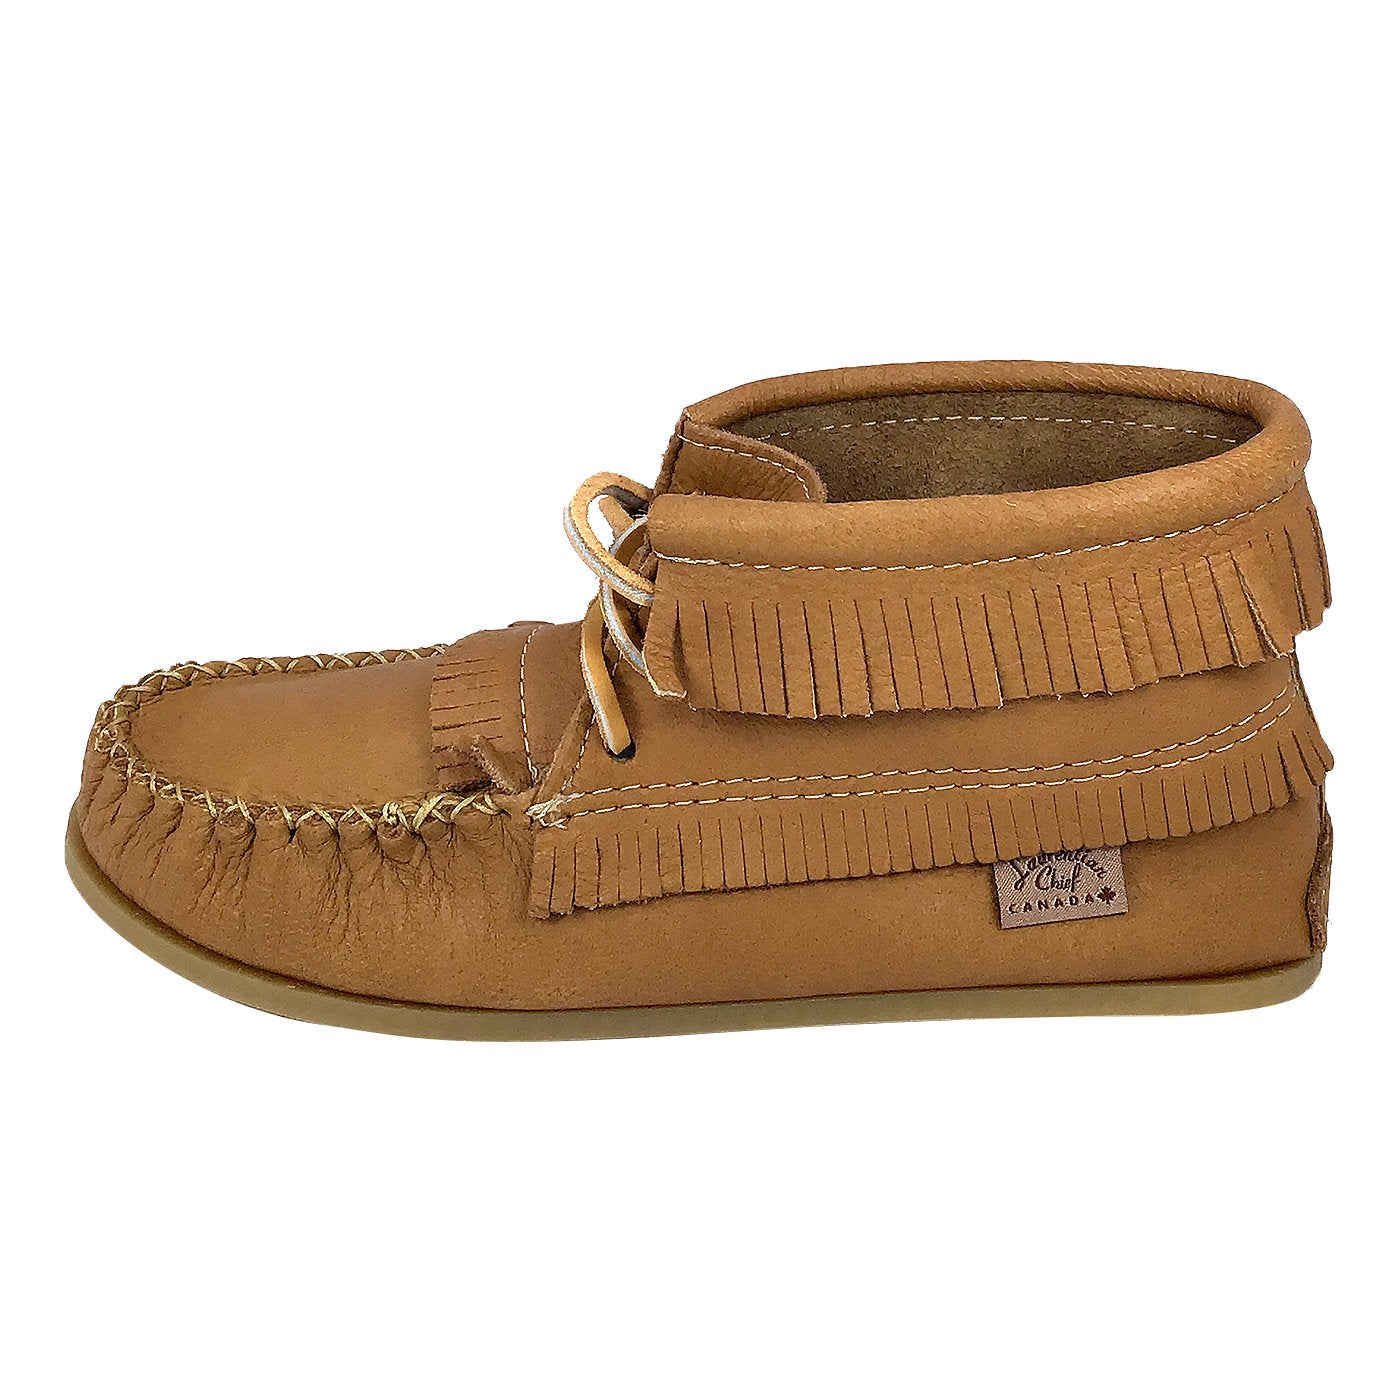 Women's Apache Cork Moccasin Boots (Final Clearance 5, 6, 7 ONLY)